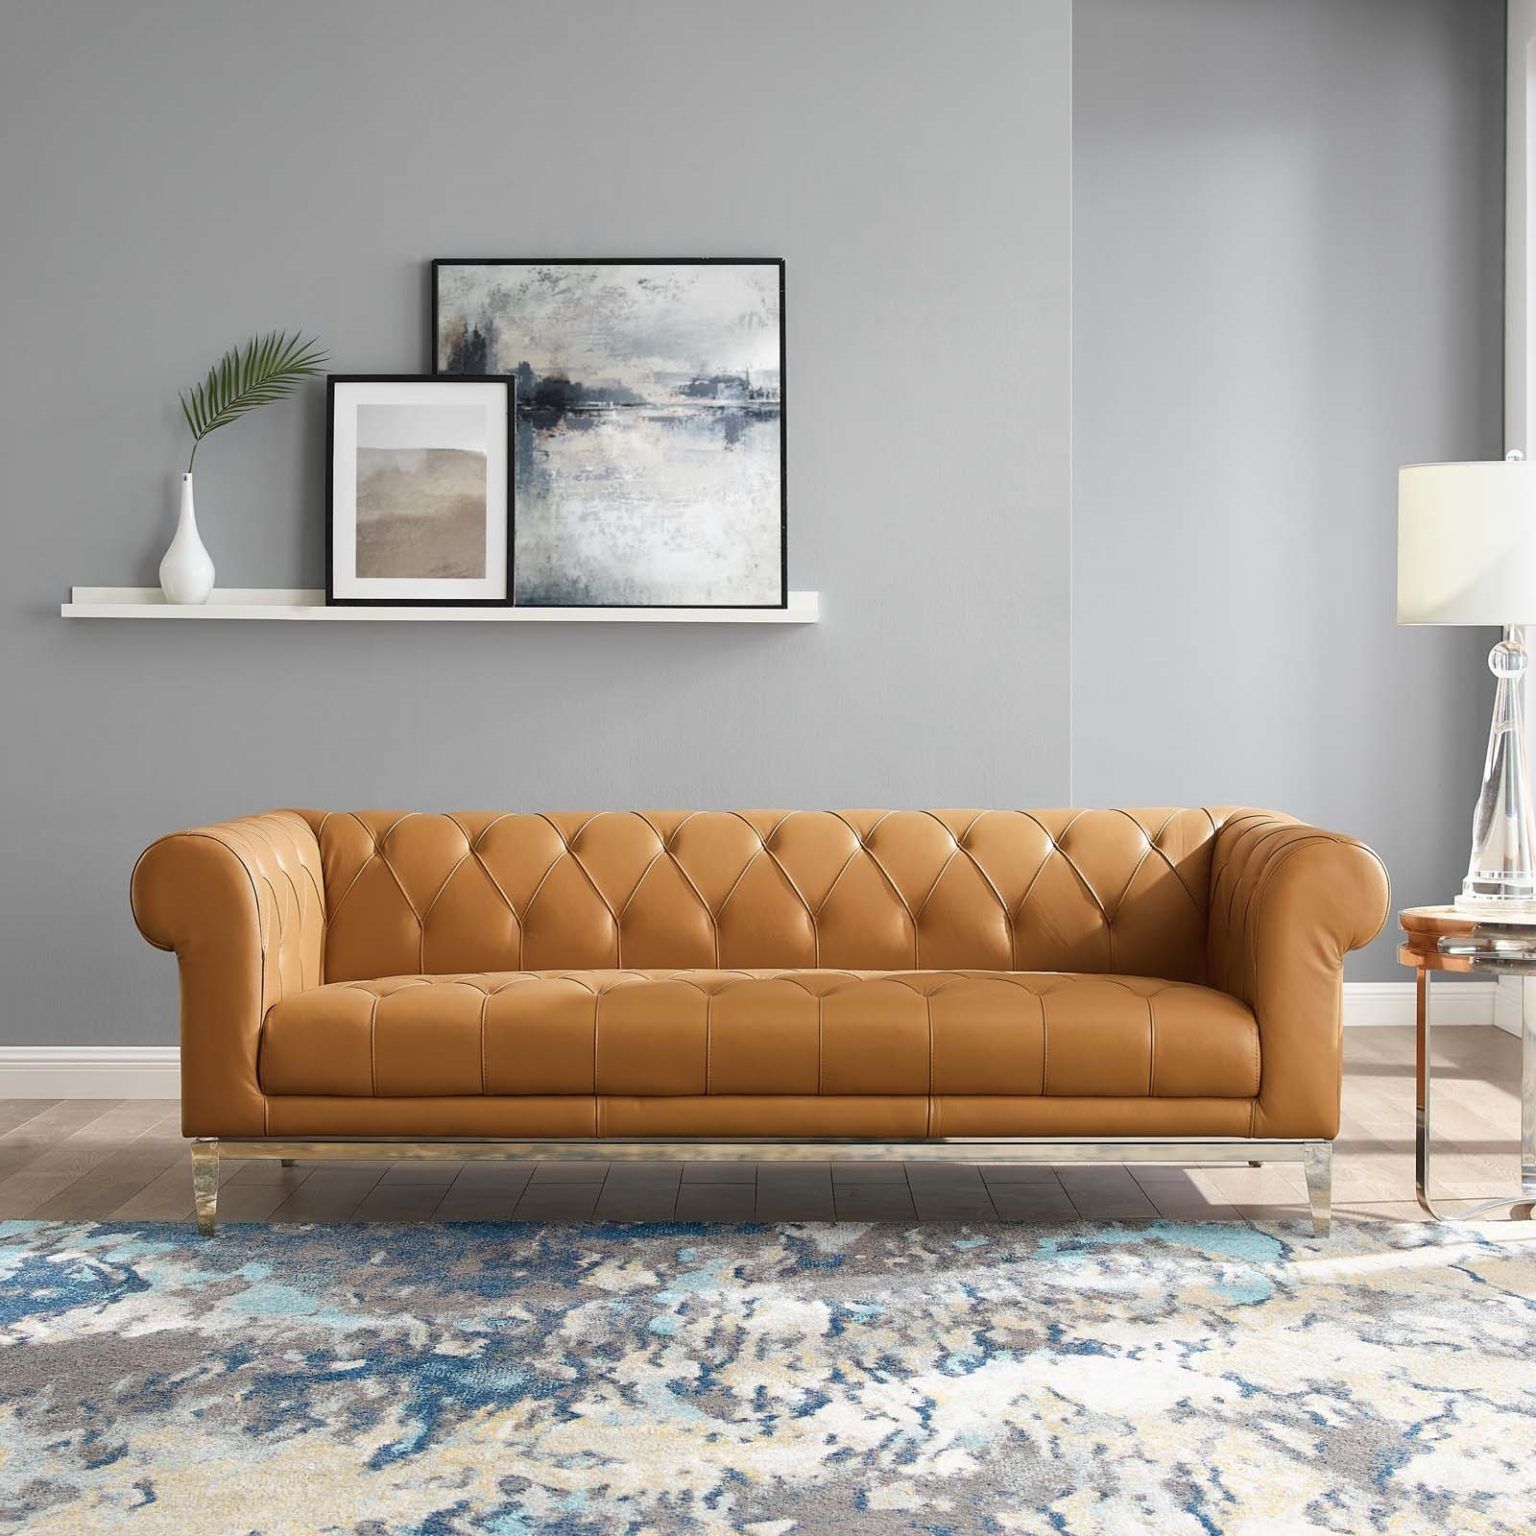 Idyll Tufted Button Upholstered Leather Chesterfield Sofa In Tan – Hyme Within Tufted Upholstered Sofas (Gallery 2 of 20)